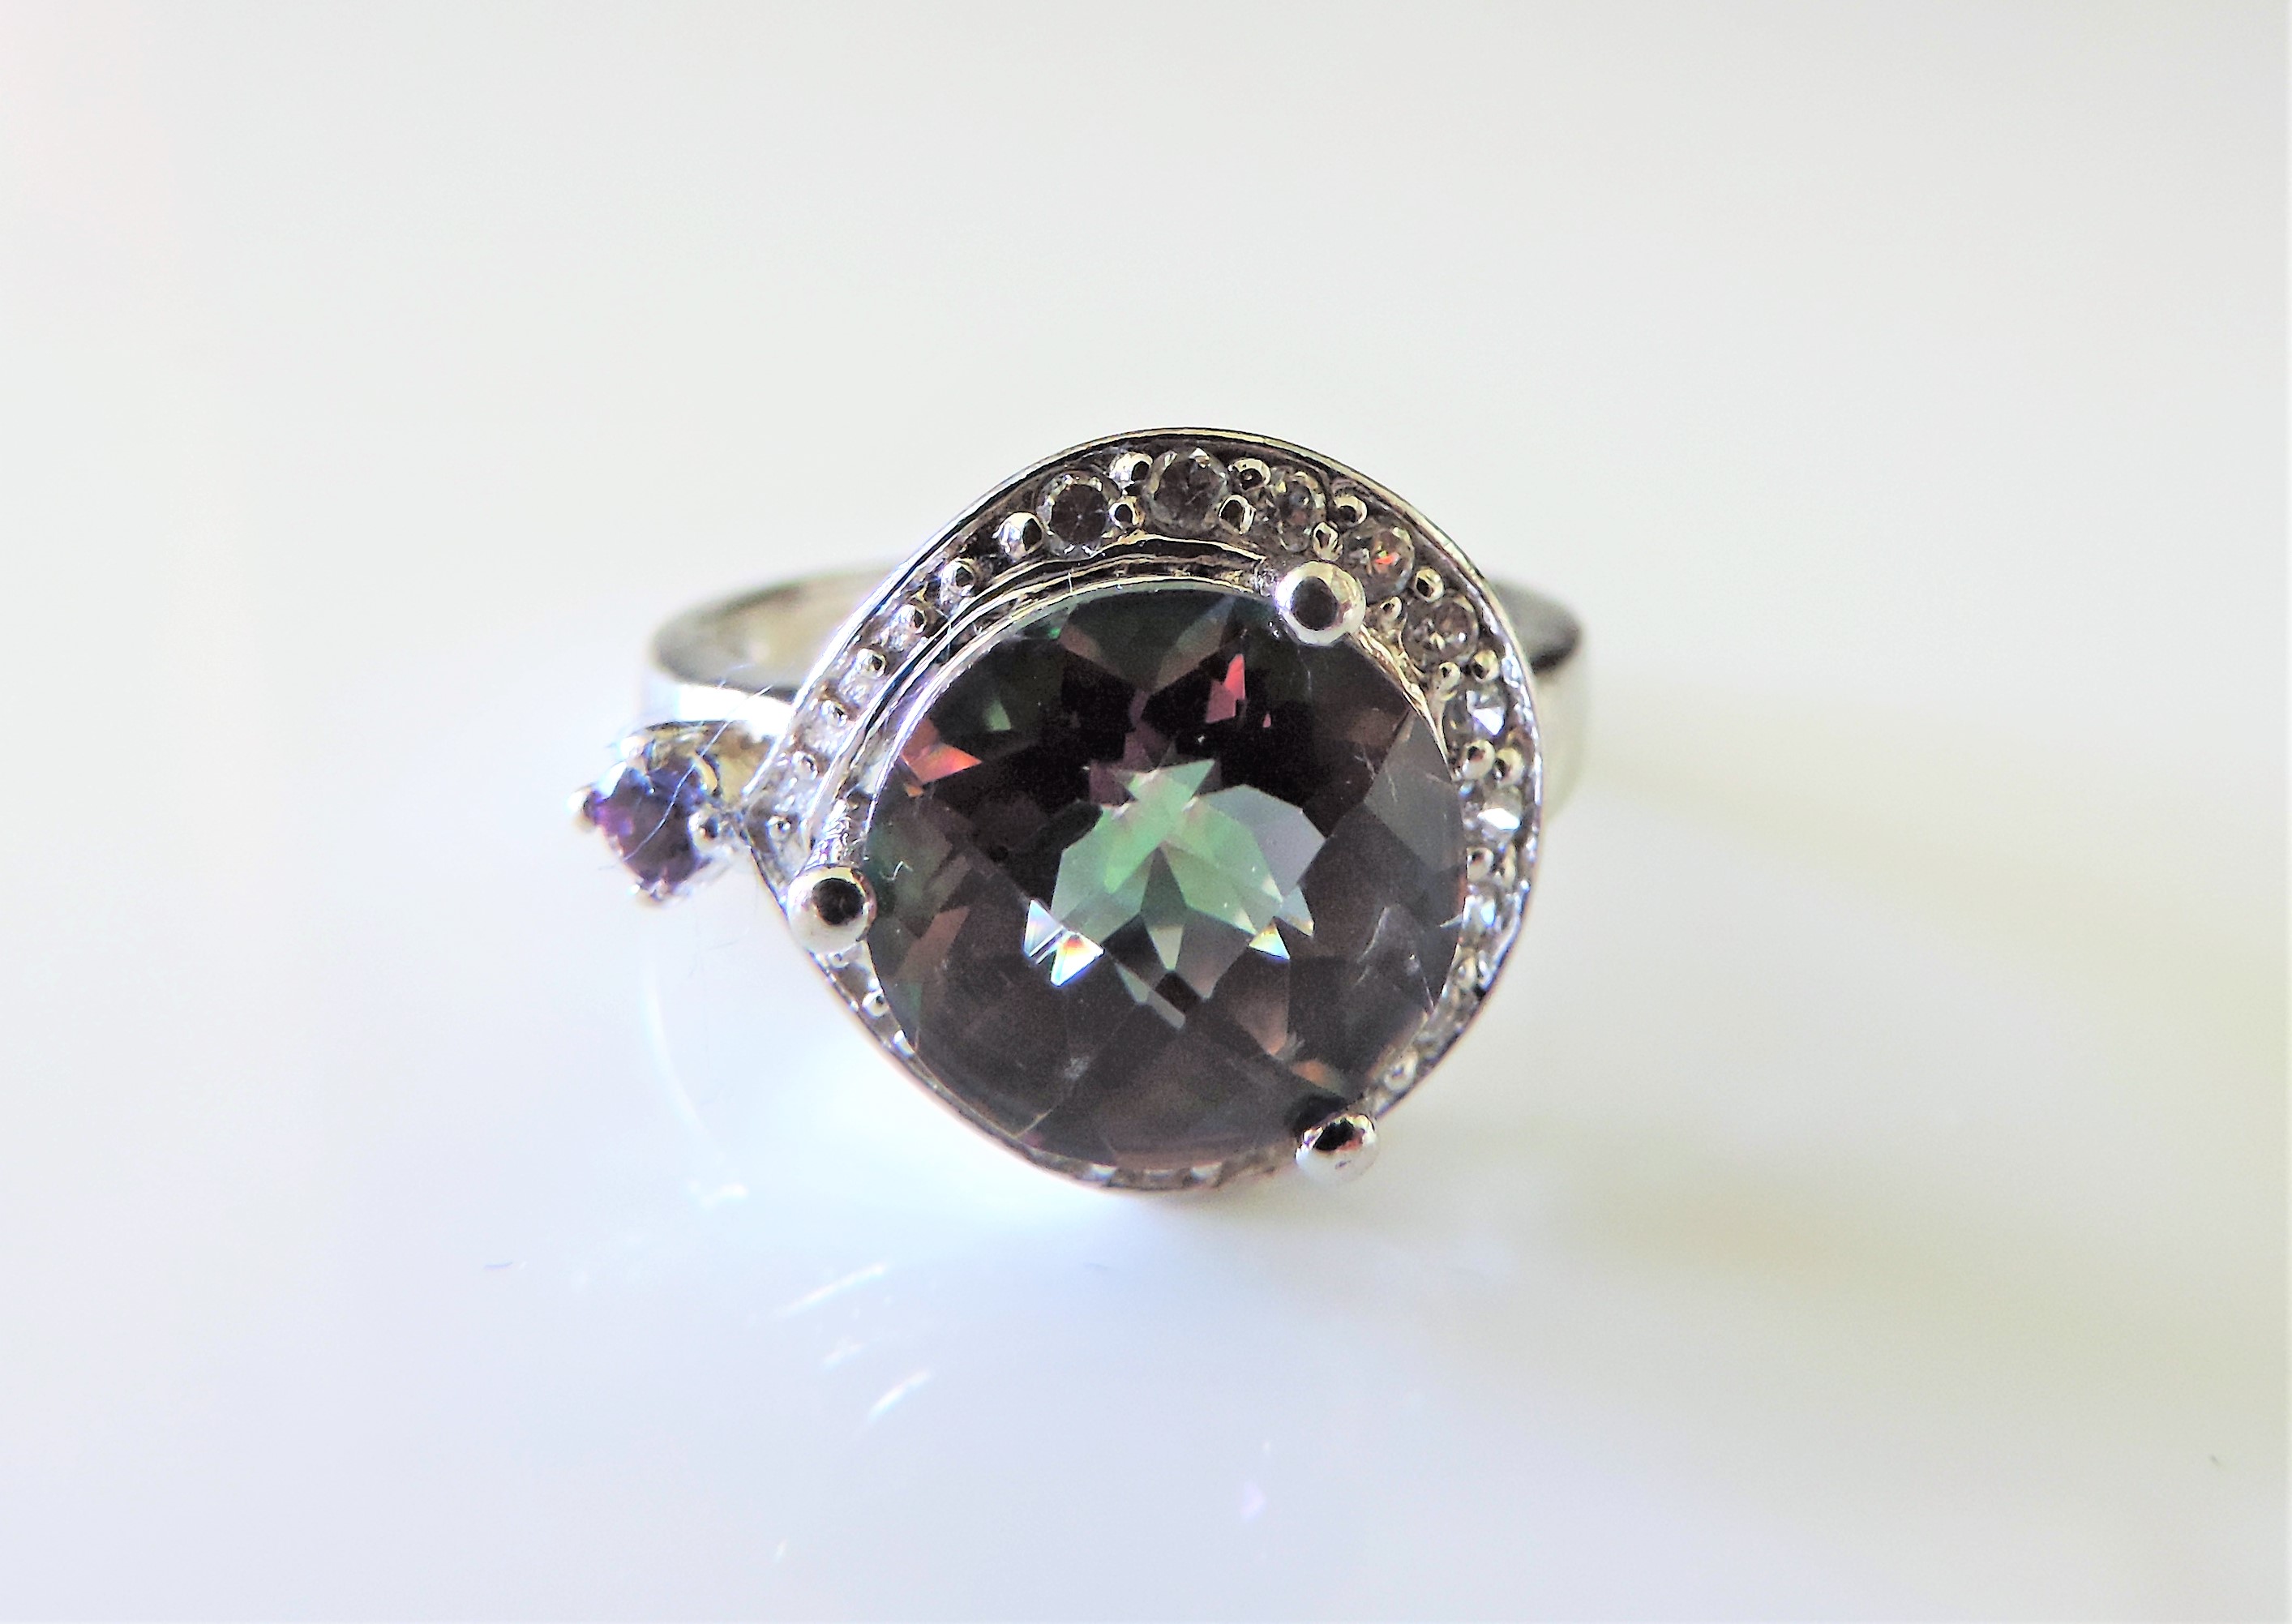 5.75ct Mystic Topaz Ring in Sterling Silver - Image 5 of 5